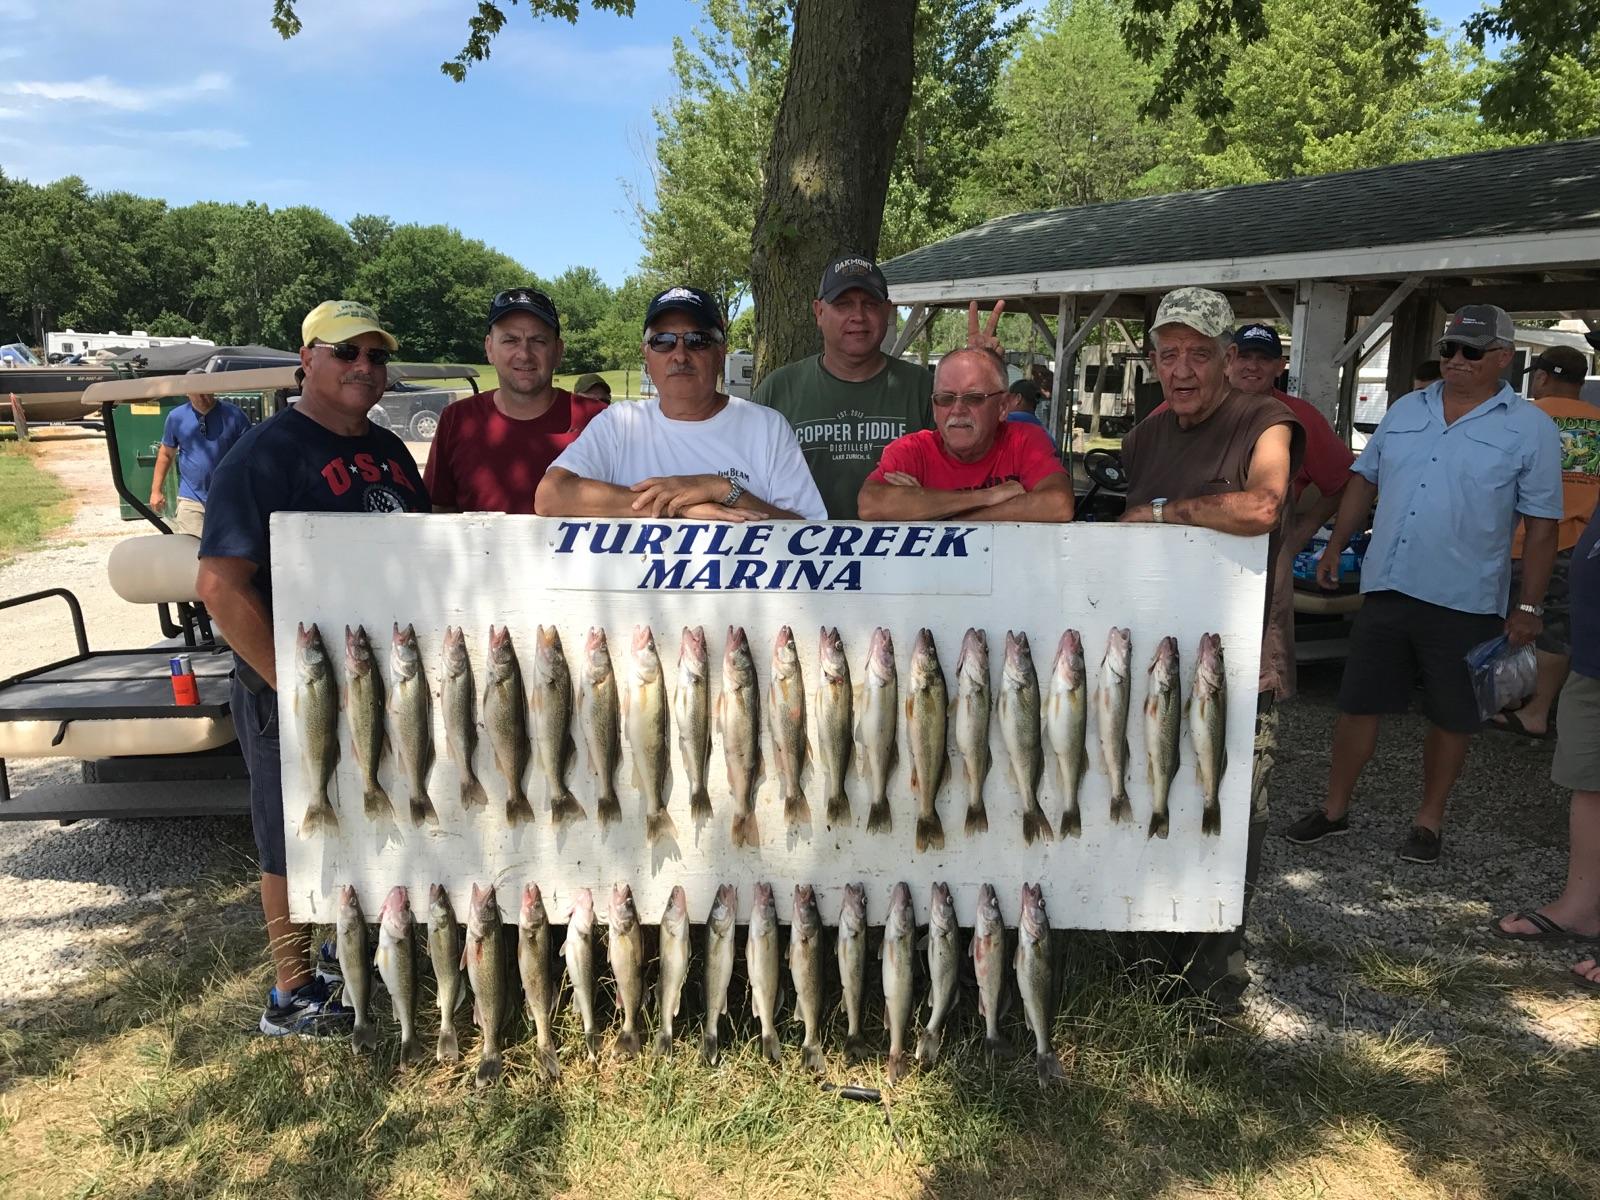 Lake Erie fishing charters fishing west of Cedar Point amusement park in Sandusky, OH. Charter boats located in Port Clinton, OH